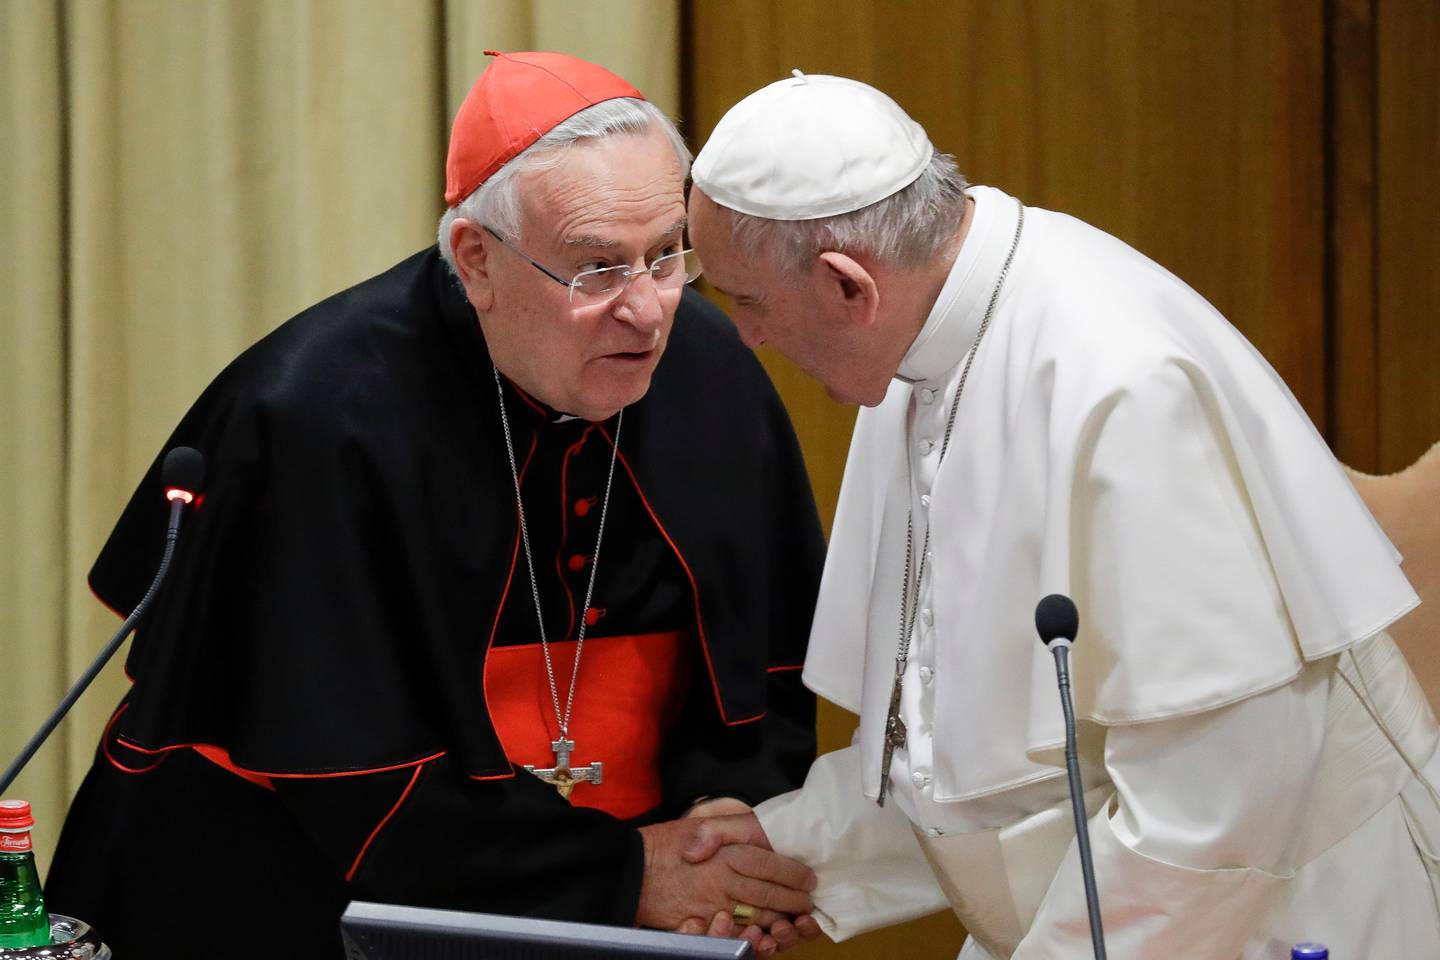 Pope Francis talks with Cardinal Gualtiero Bassetti, president of the Italian Bishops Conference, during their annual meeting, at the Vatican, Monday, May 20, 2019. (AP Photo/Andrew Medichini)